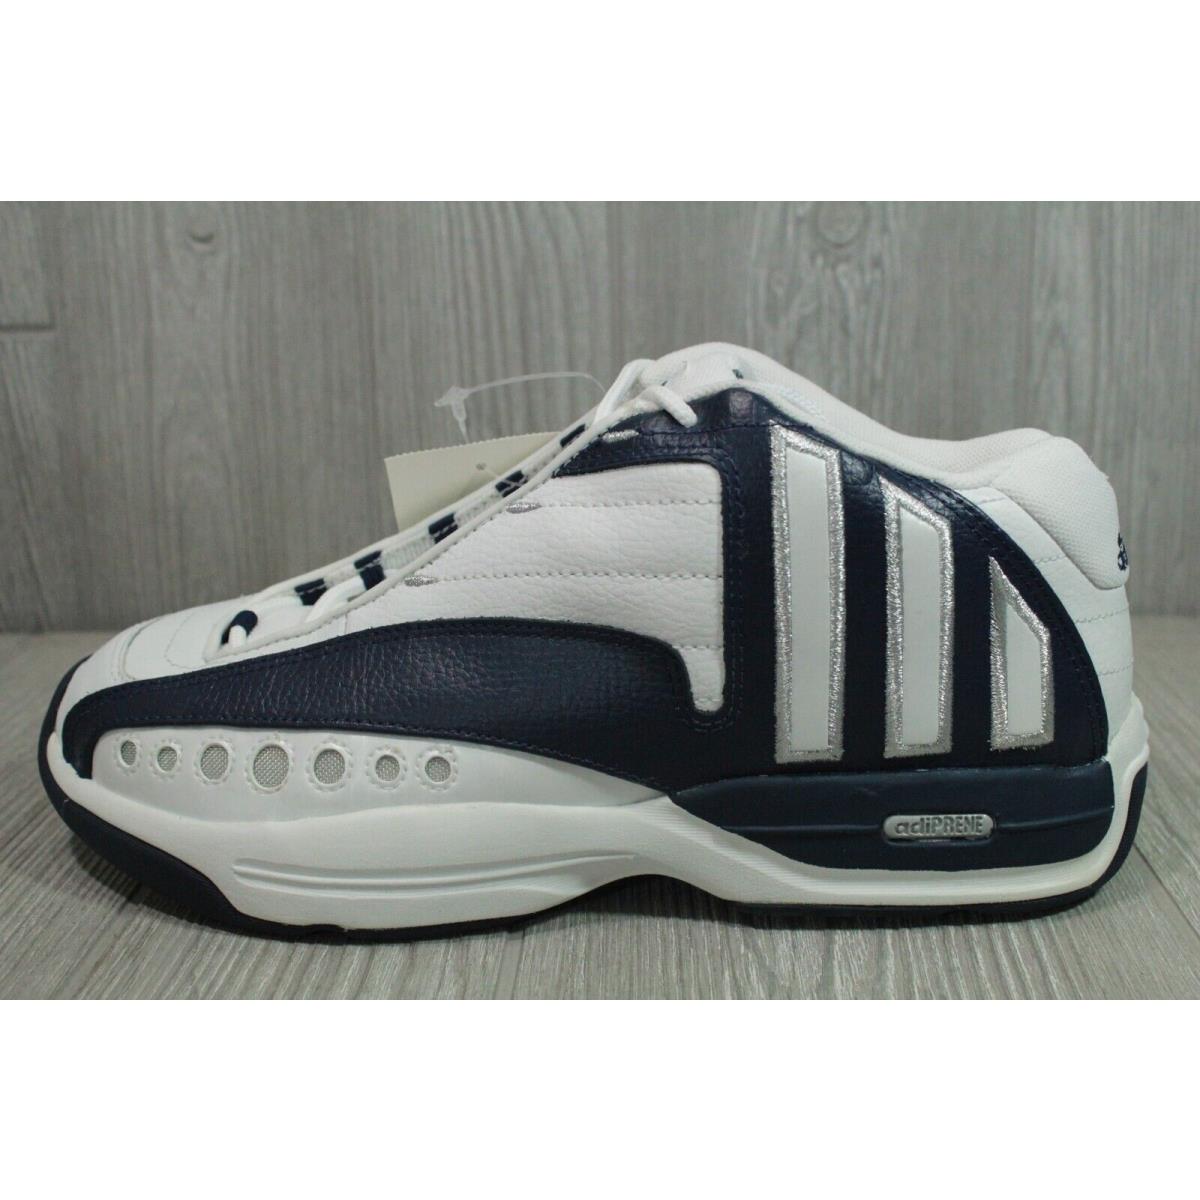 Vintage Adidas Acquisition Basketball Shoes 2000 Men`s Size 9.5 Oss